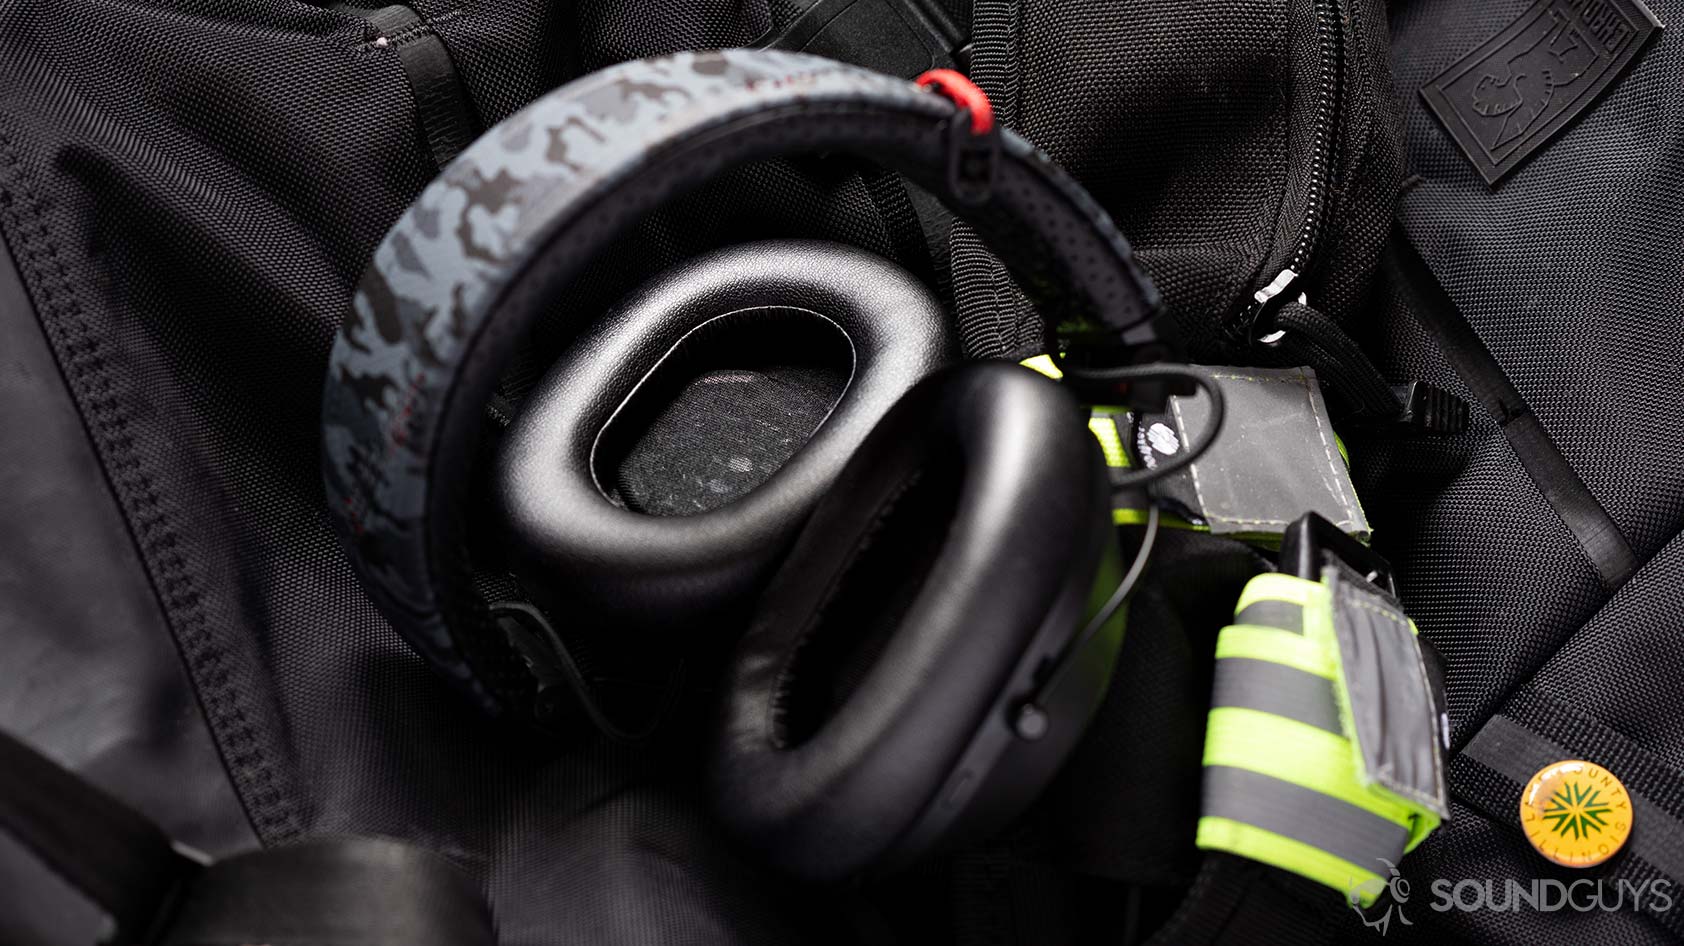 The Plantronics BackBeat Fit 6100 workout headphones' ear cups slightly angled to show the 40mm dynamic drivers.